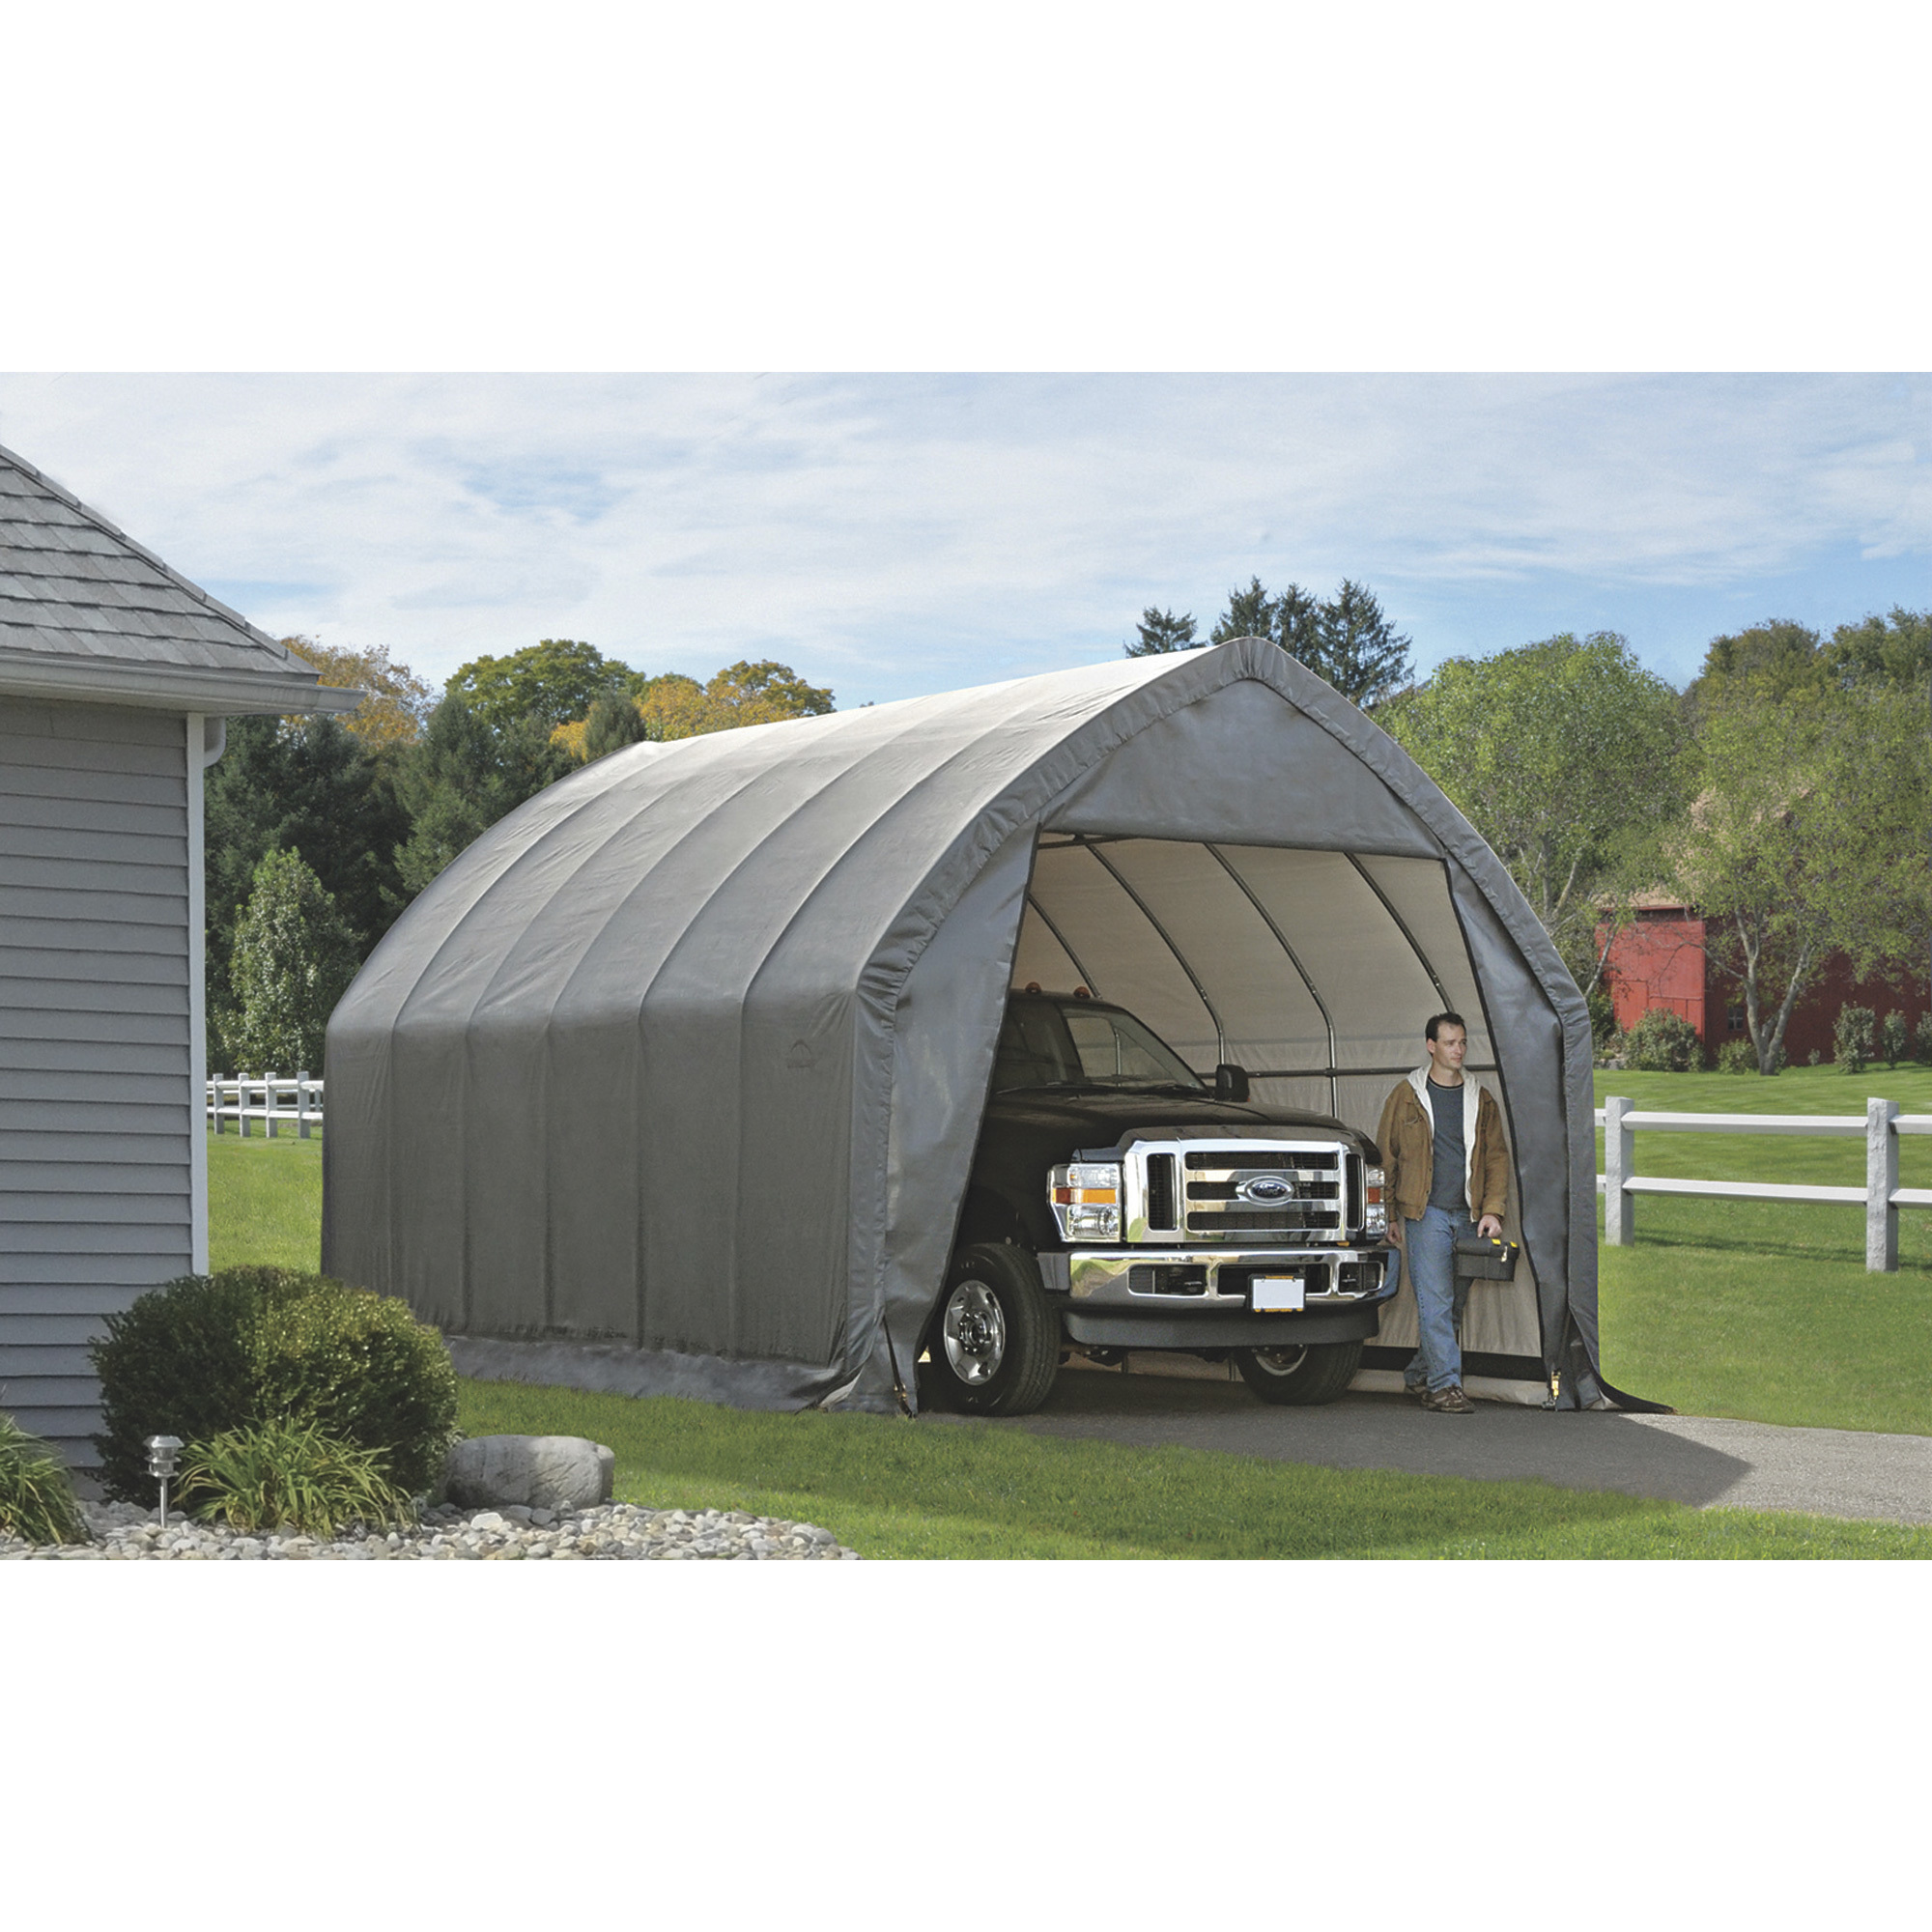 12ft.H, Northern SUV/Truck | Instant Shelter, Tool x 20ft.L Model# x ShelterLogic Garage-in-a-Box 13ft.W 62693 for